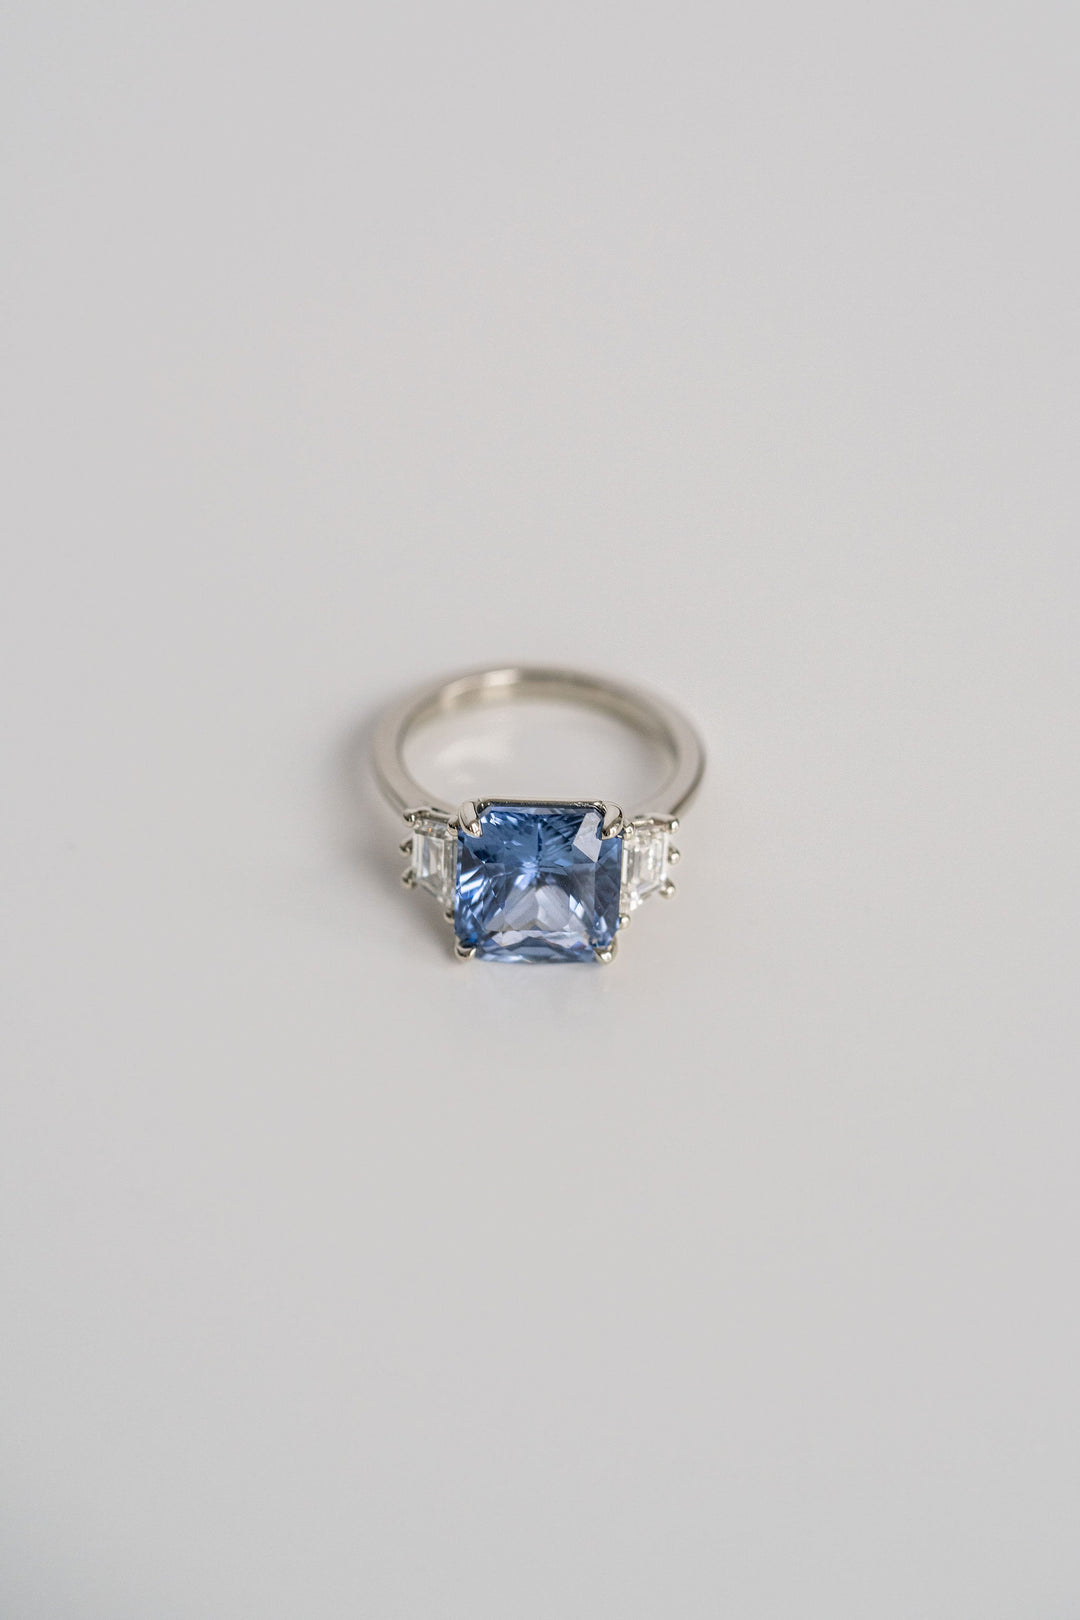 6.20ct Radiant Cut Blue Sri Lankan Sapphire With Trapezoid Diamond Accents, 14k White Gold